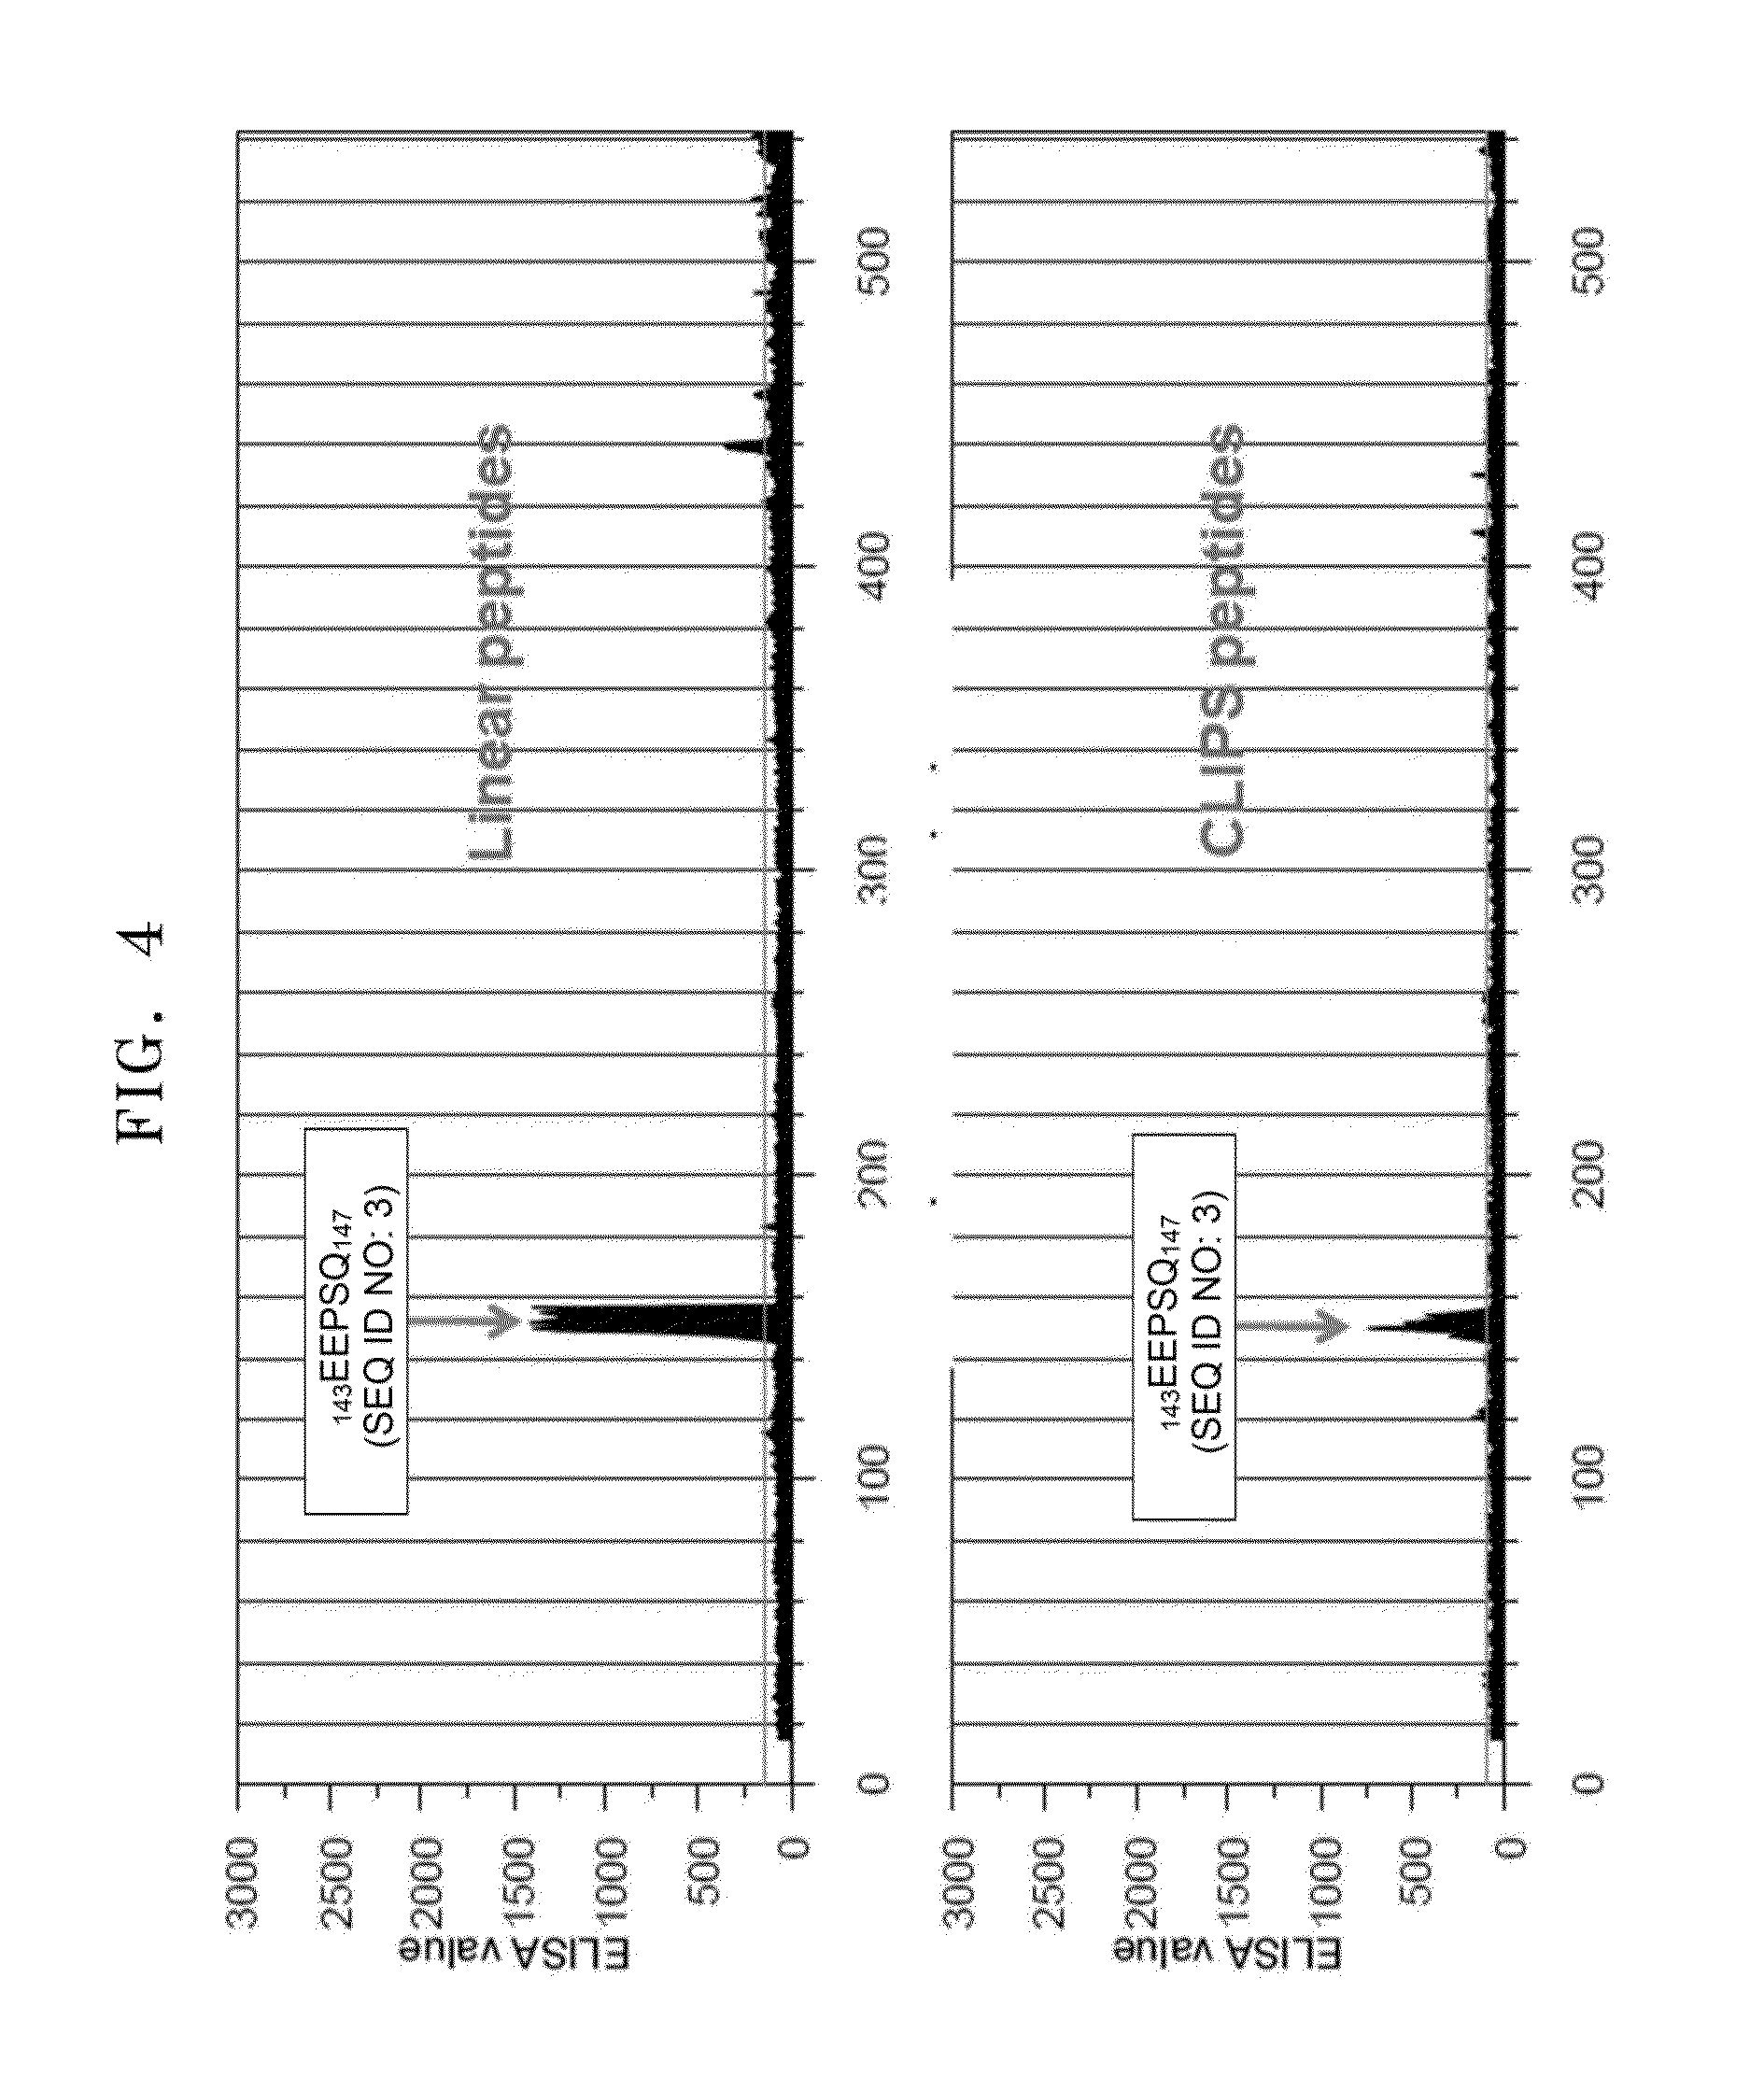 Antibody specifically binding to epitope in SEMA domain of c-Met